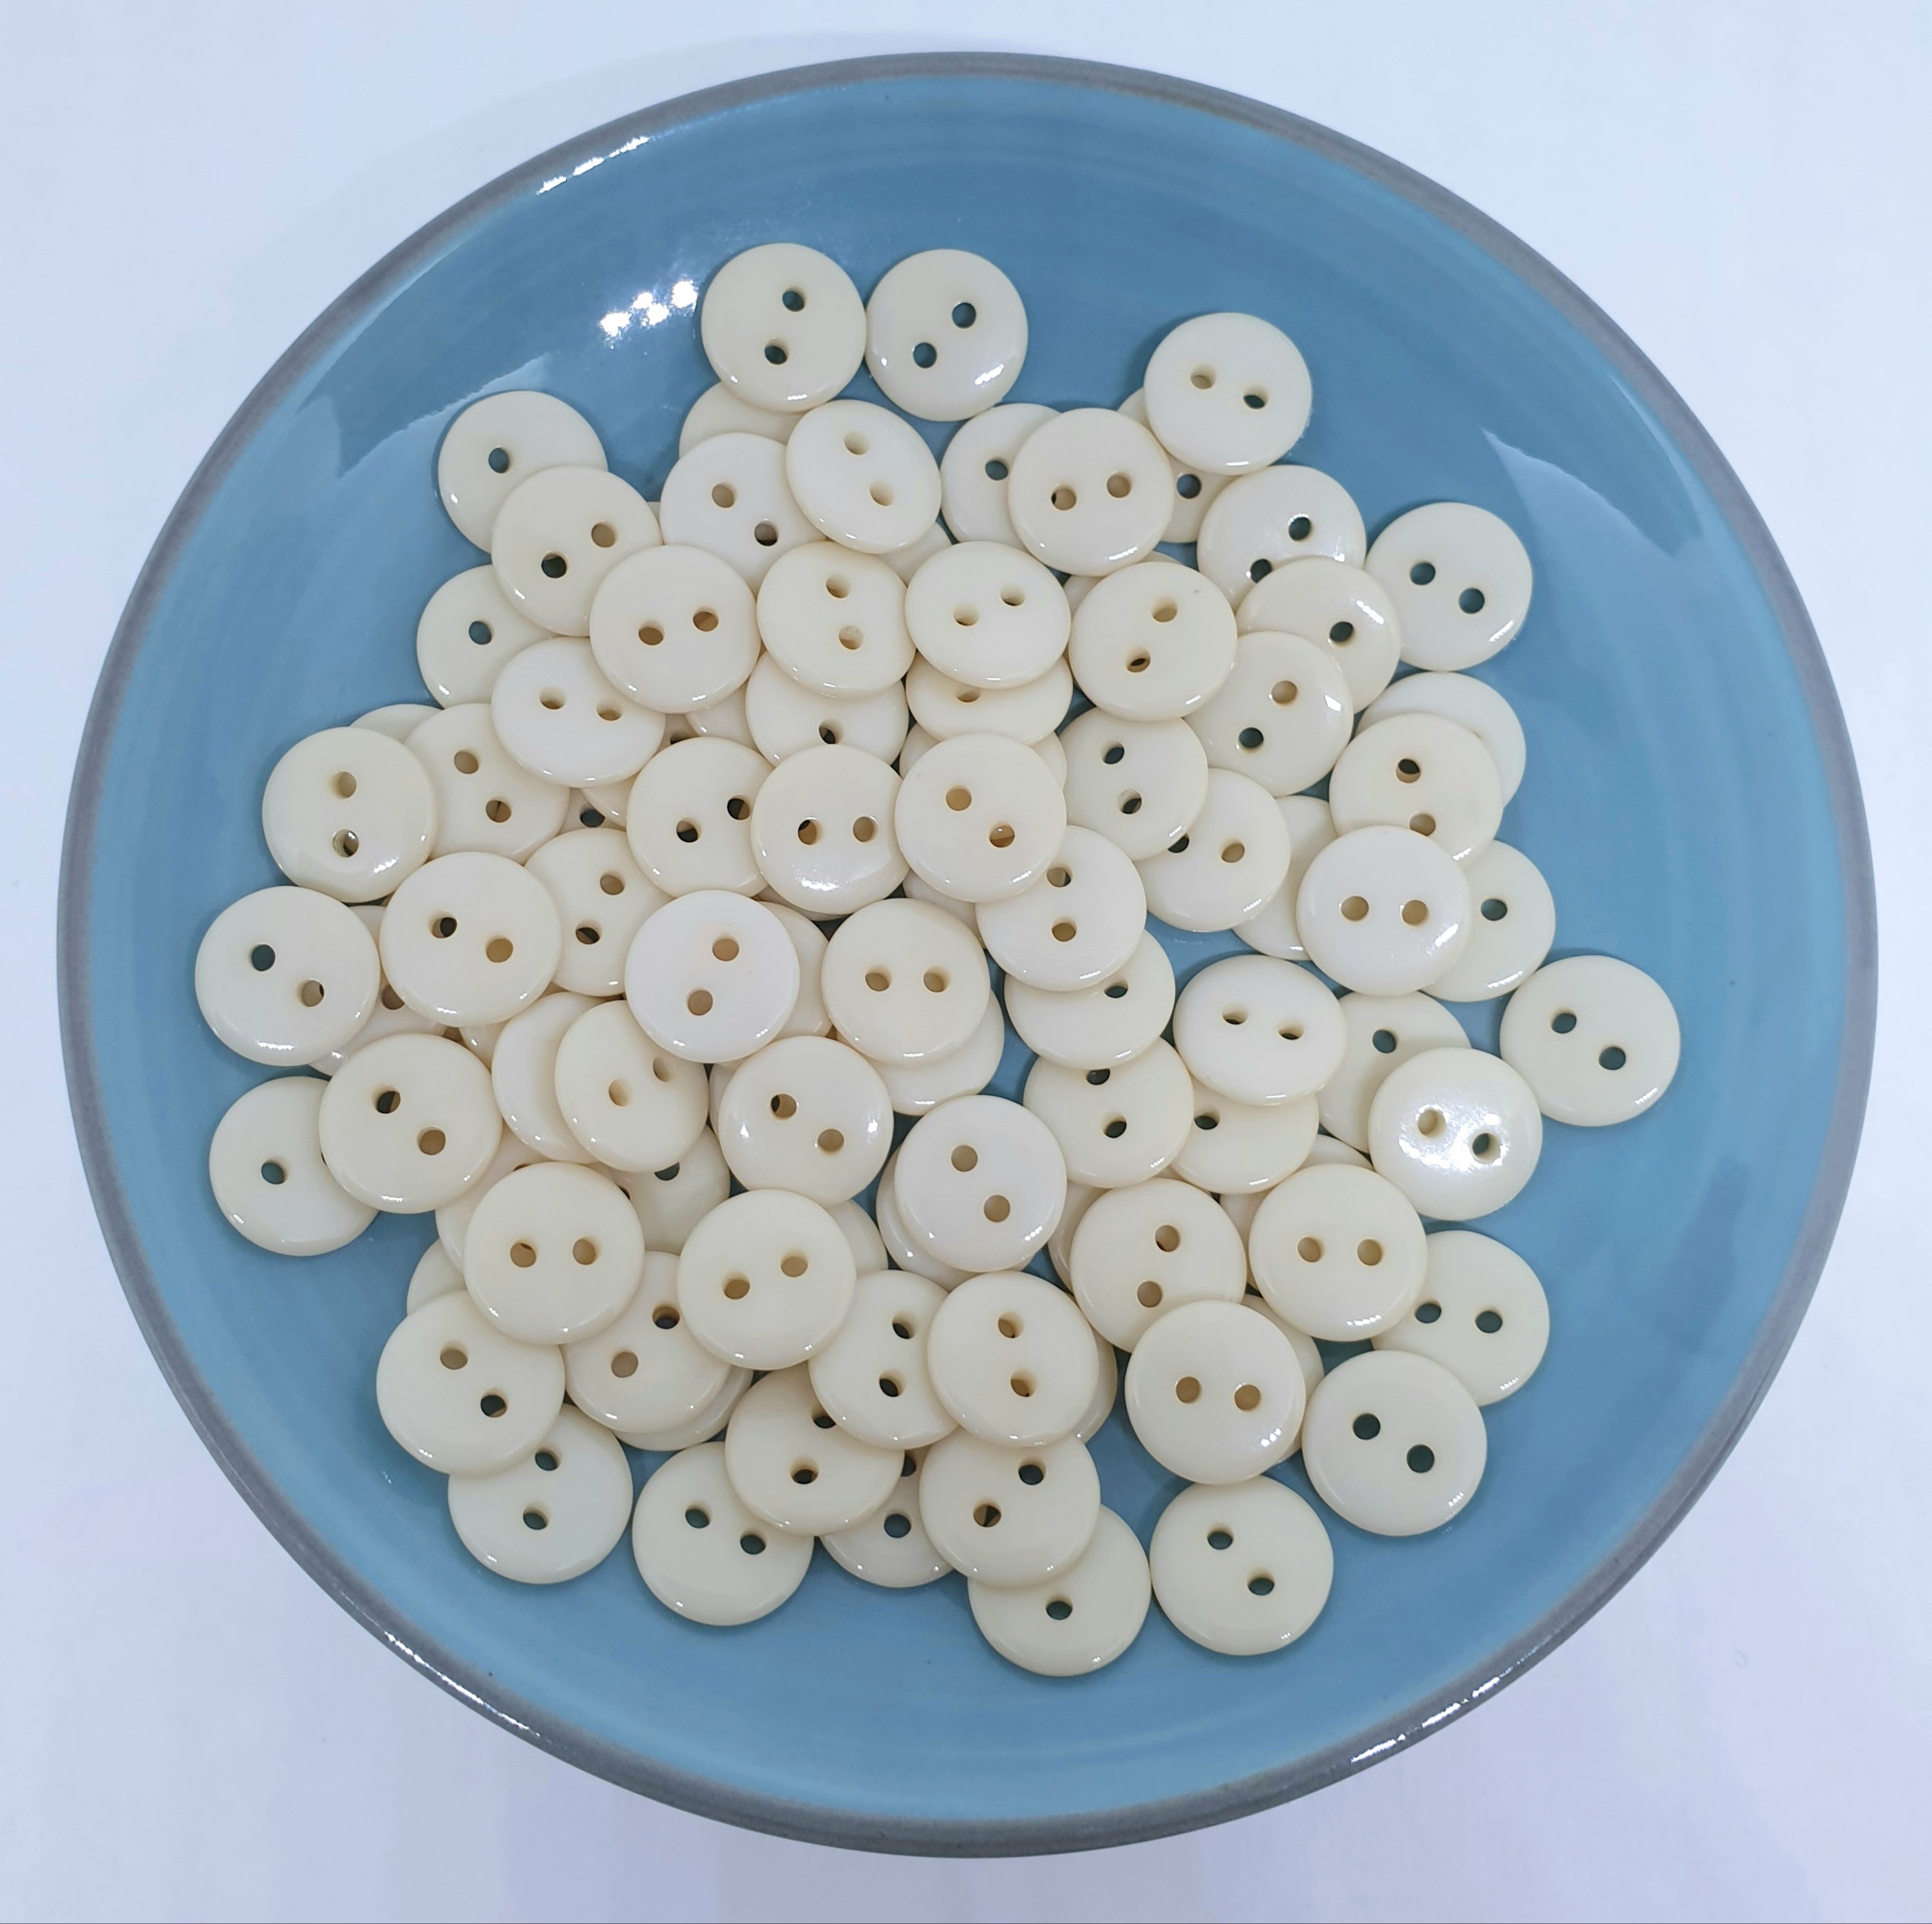 MajorCrafts 120pcs 9mm Cream Small 2 Holes Round Resin Sewing Buttons B23